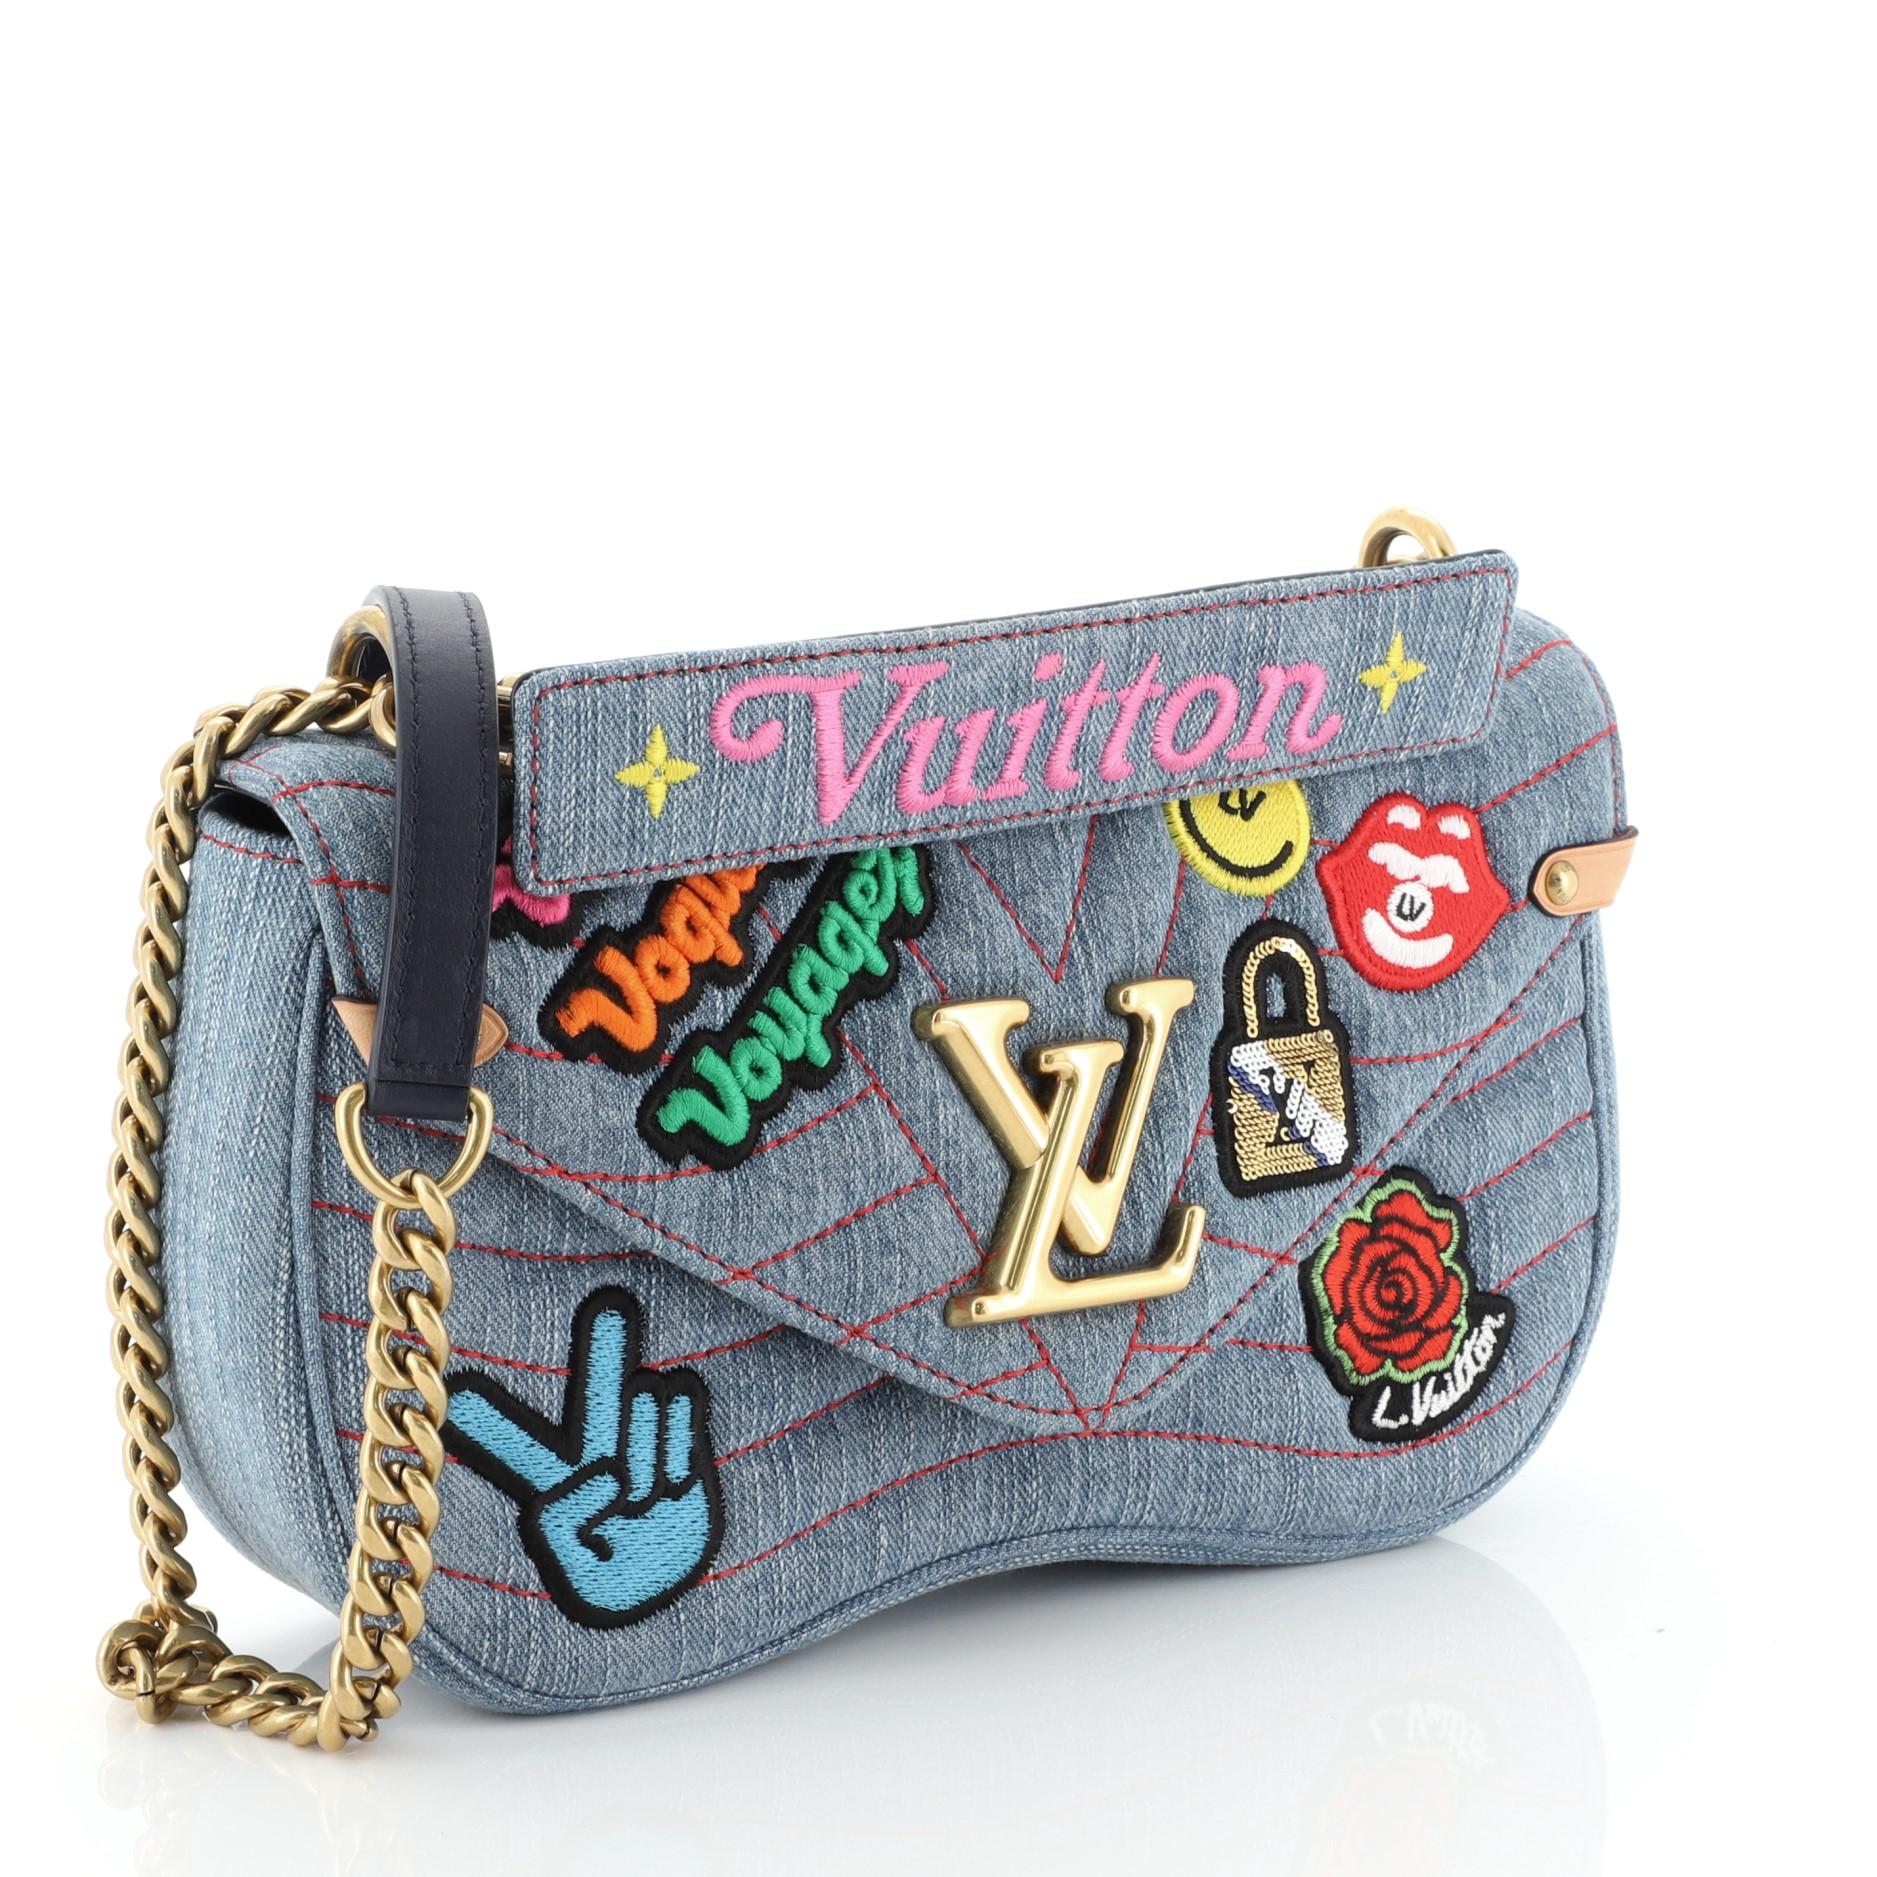 This Louis Vuitton New Wave Chain Bag Limited Edition Patches Quilted Denim MM crafted from blue quilted deniim, features a sliding chain-link shoulder strap with leather pad, detachable handle signed “Louis Vuitton,” colourful textile patches and